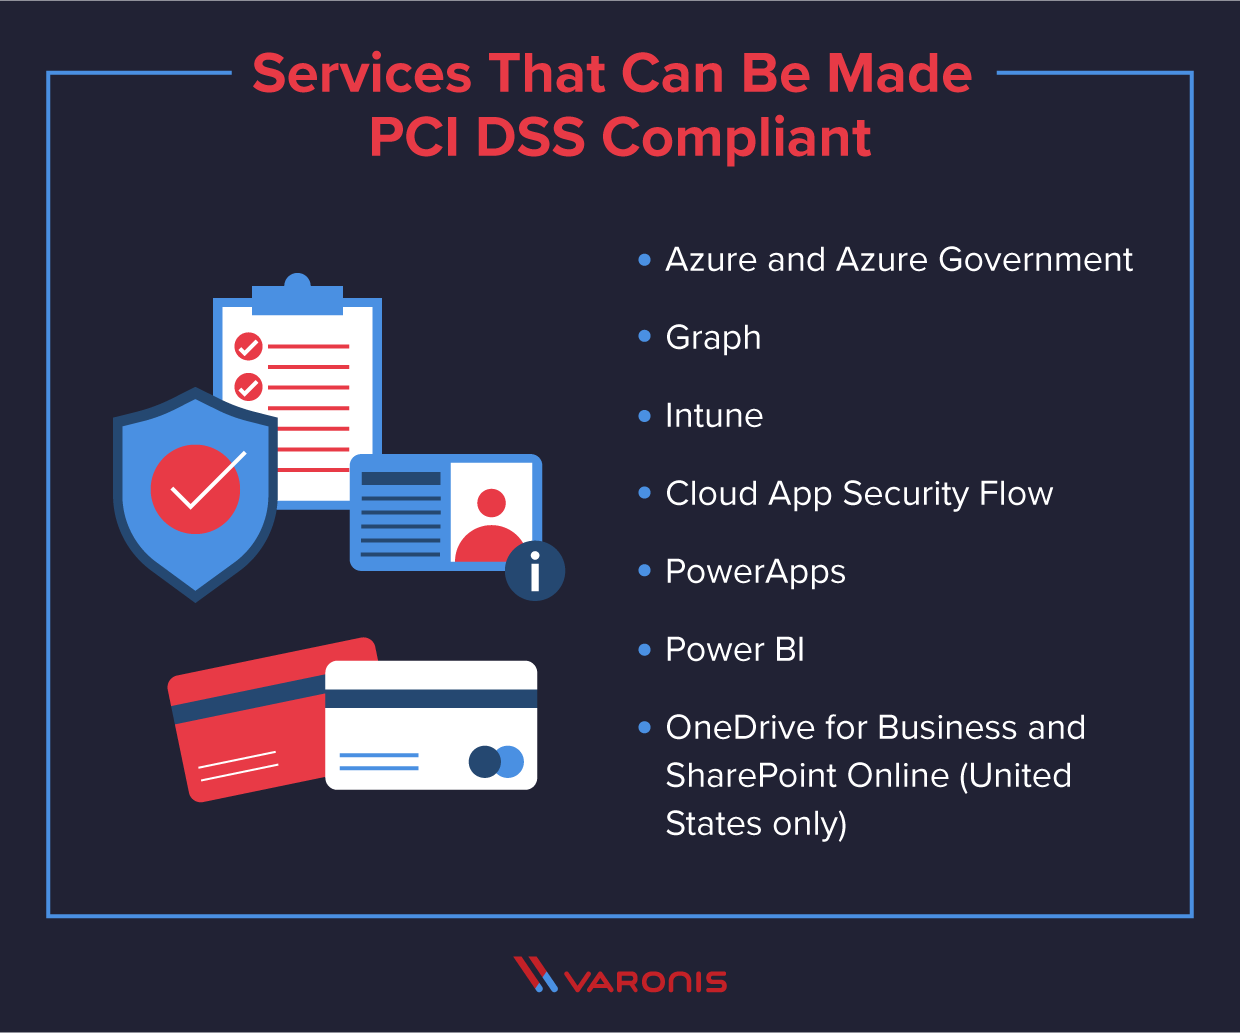 list of services that can be made PCI compliant